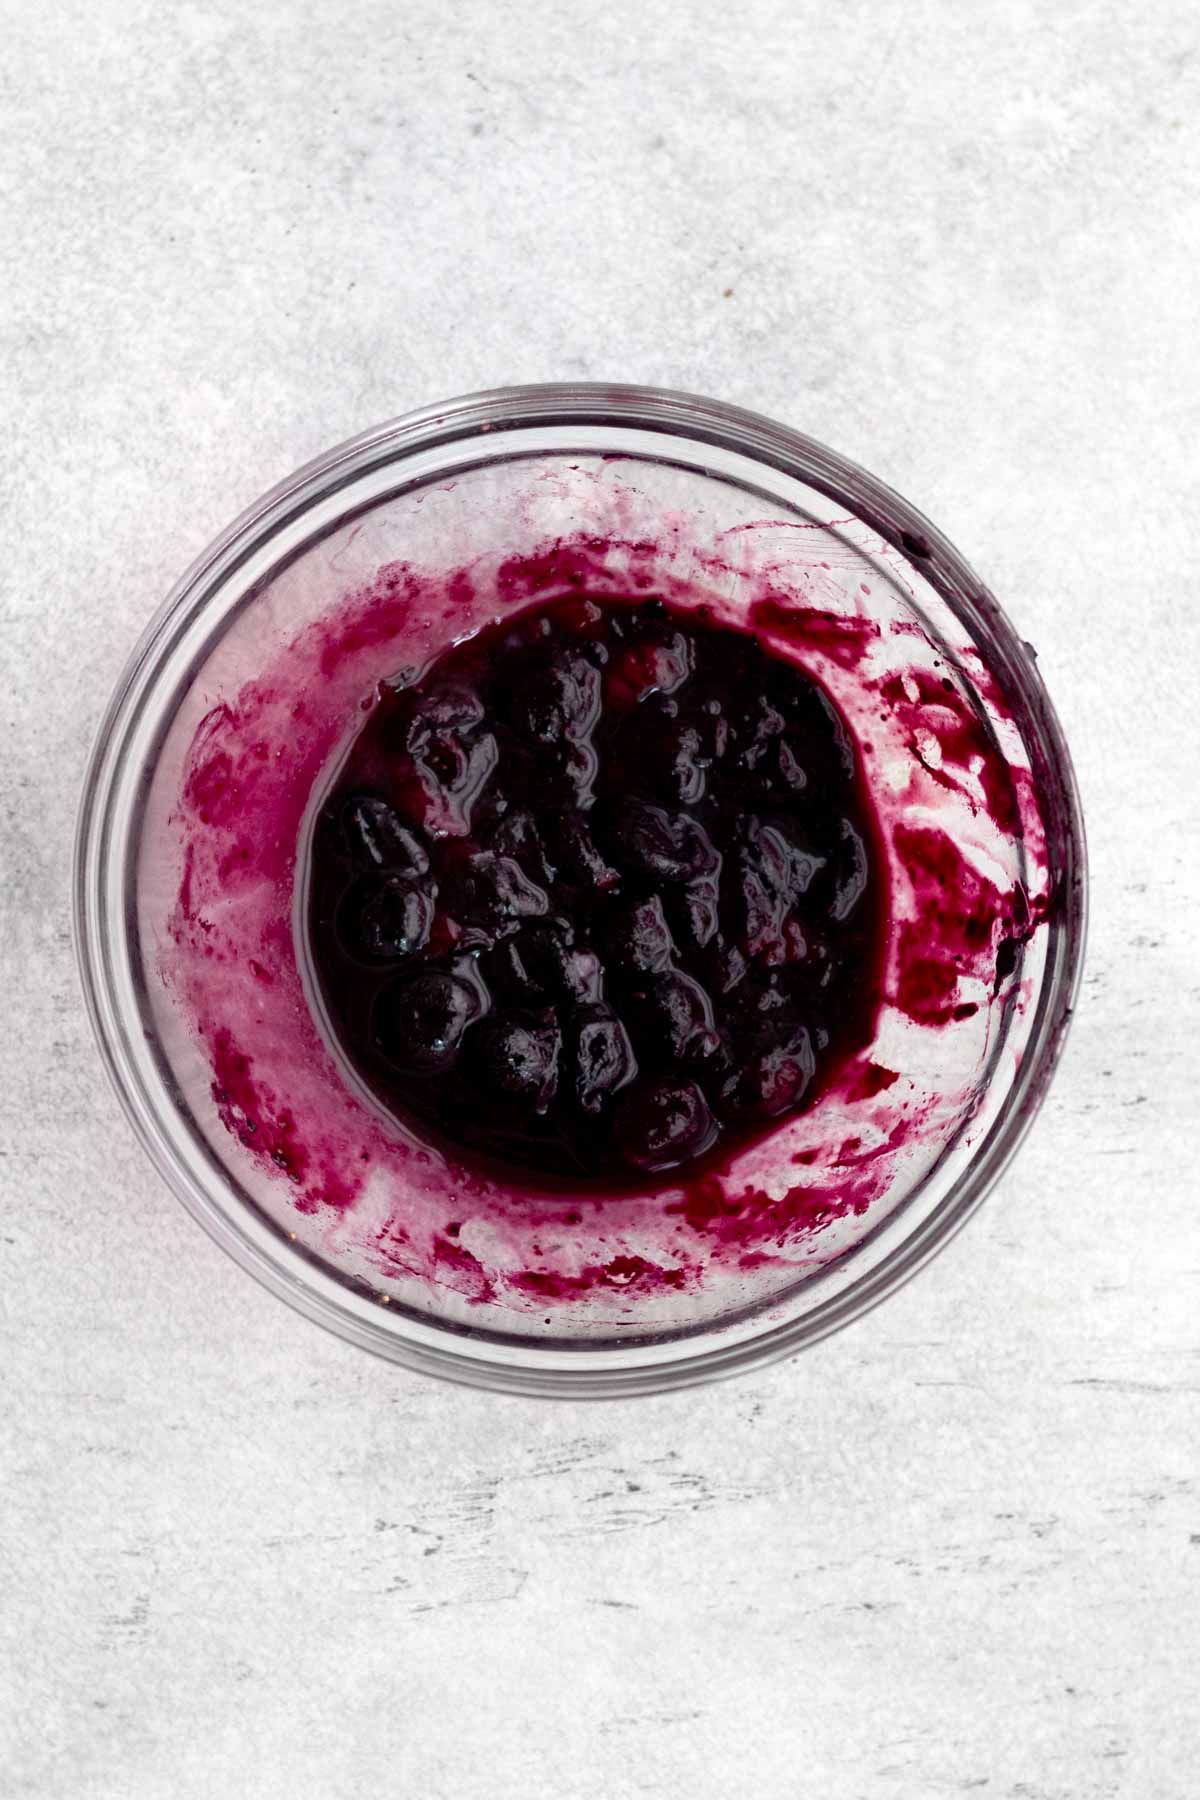 A bowl of blueberries and juice.